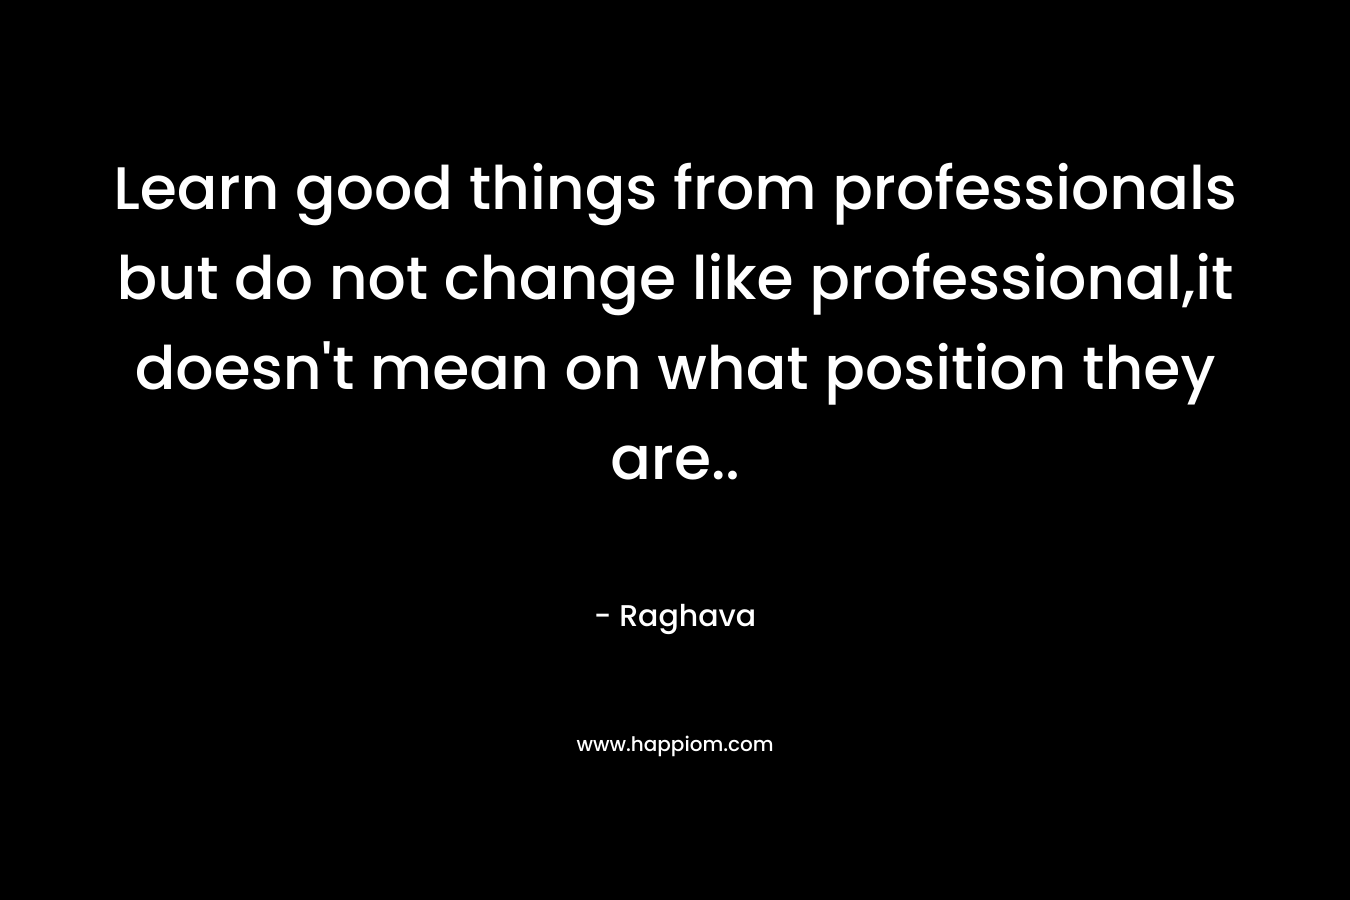 Learn good things from professionals but do not change like professional,it doesn’t mean on what position they are.. – Raghava